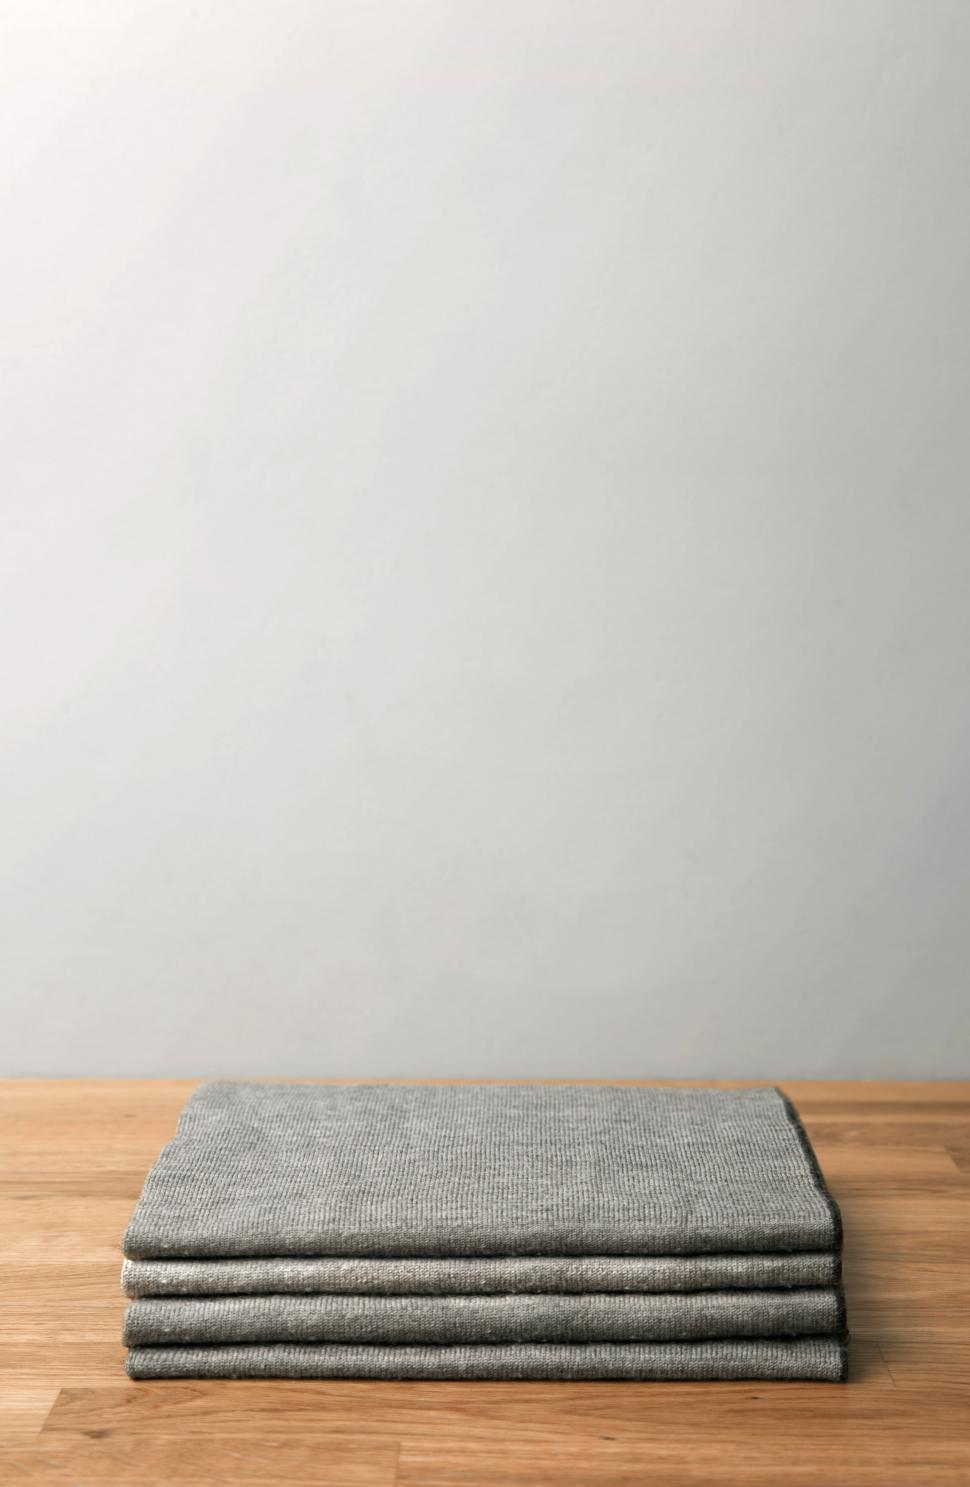 Free Image of A grey square object on a wooden surface 